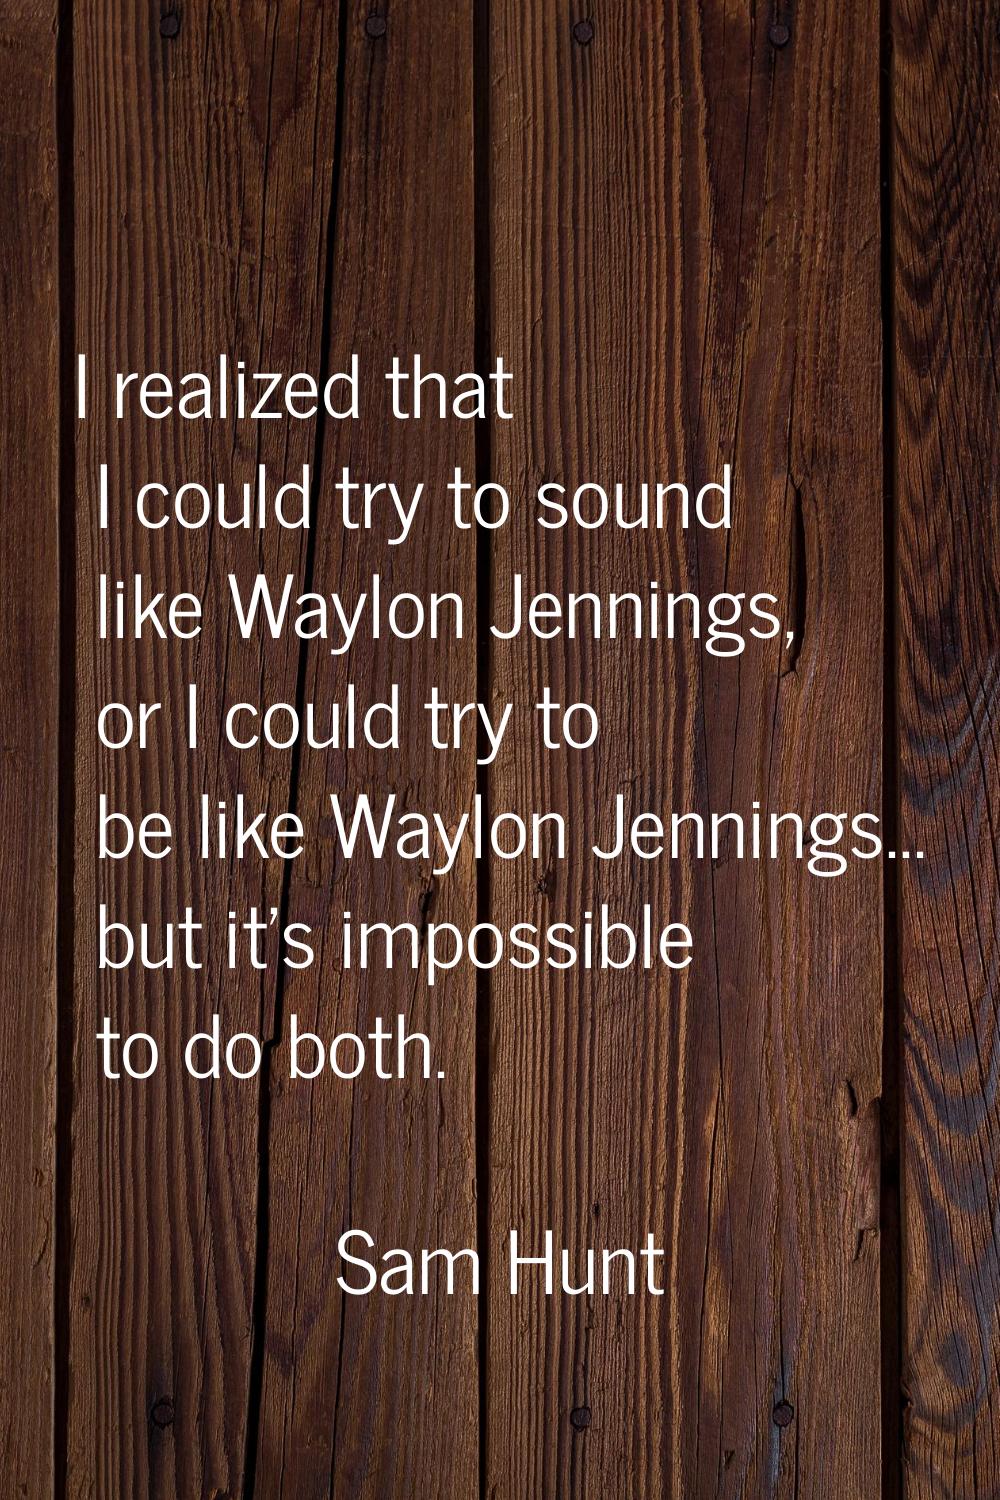 I realized that I could try to sound like Waylon Jennings, or I could try to be like Waylon Jenning